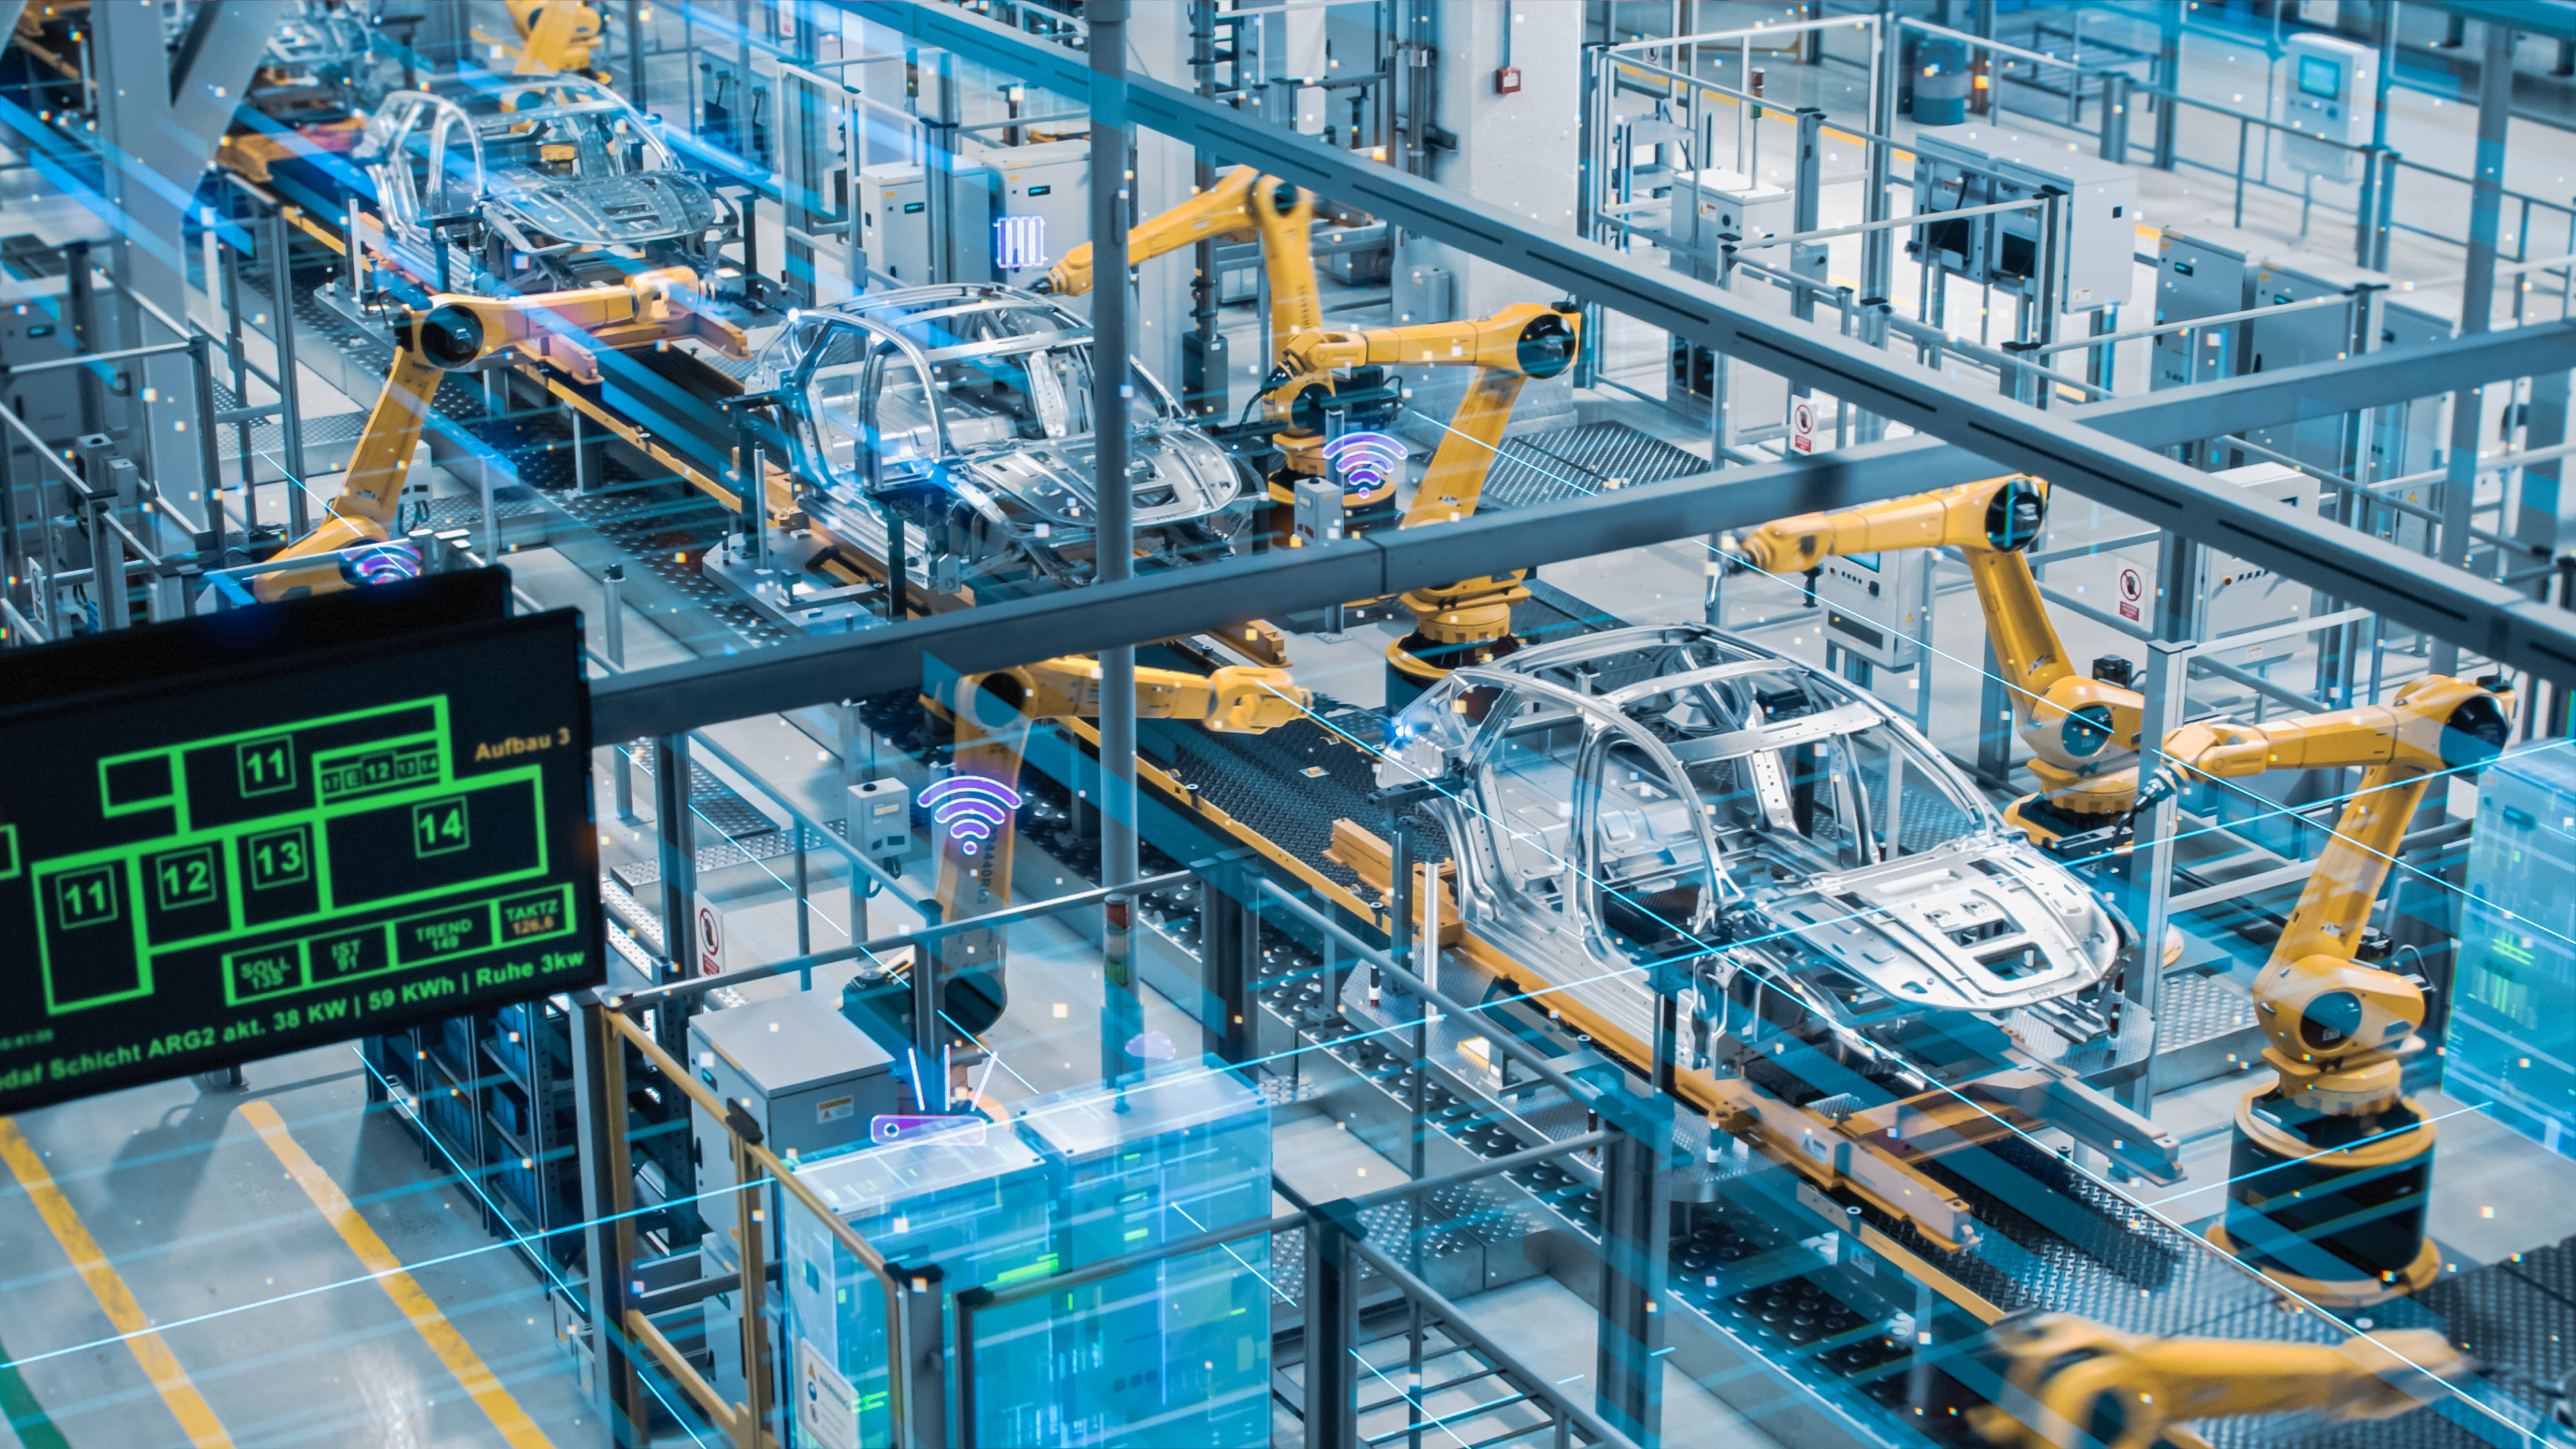 A CGI render of an automated, smart manufacturing floor using Industrial Internet of Things (IoT) sensors. Machine arms construct a car, while holographic lines and WiFI symbols denote a private network of devices within the factory.